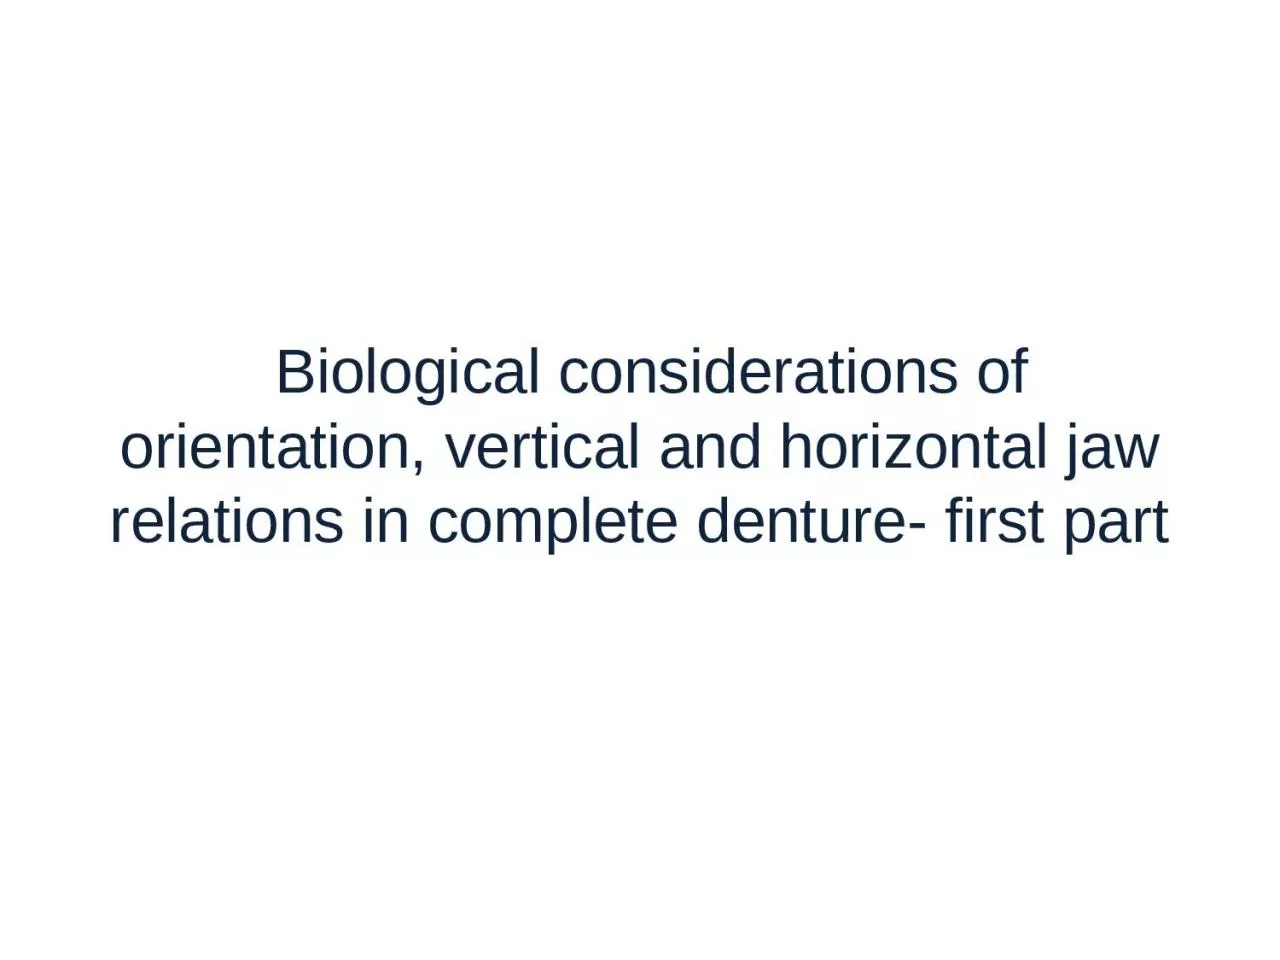 Biological considerations of orientation, vertical and horizontal jaw relations in complete